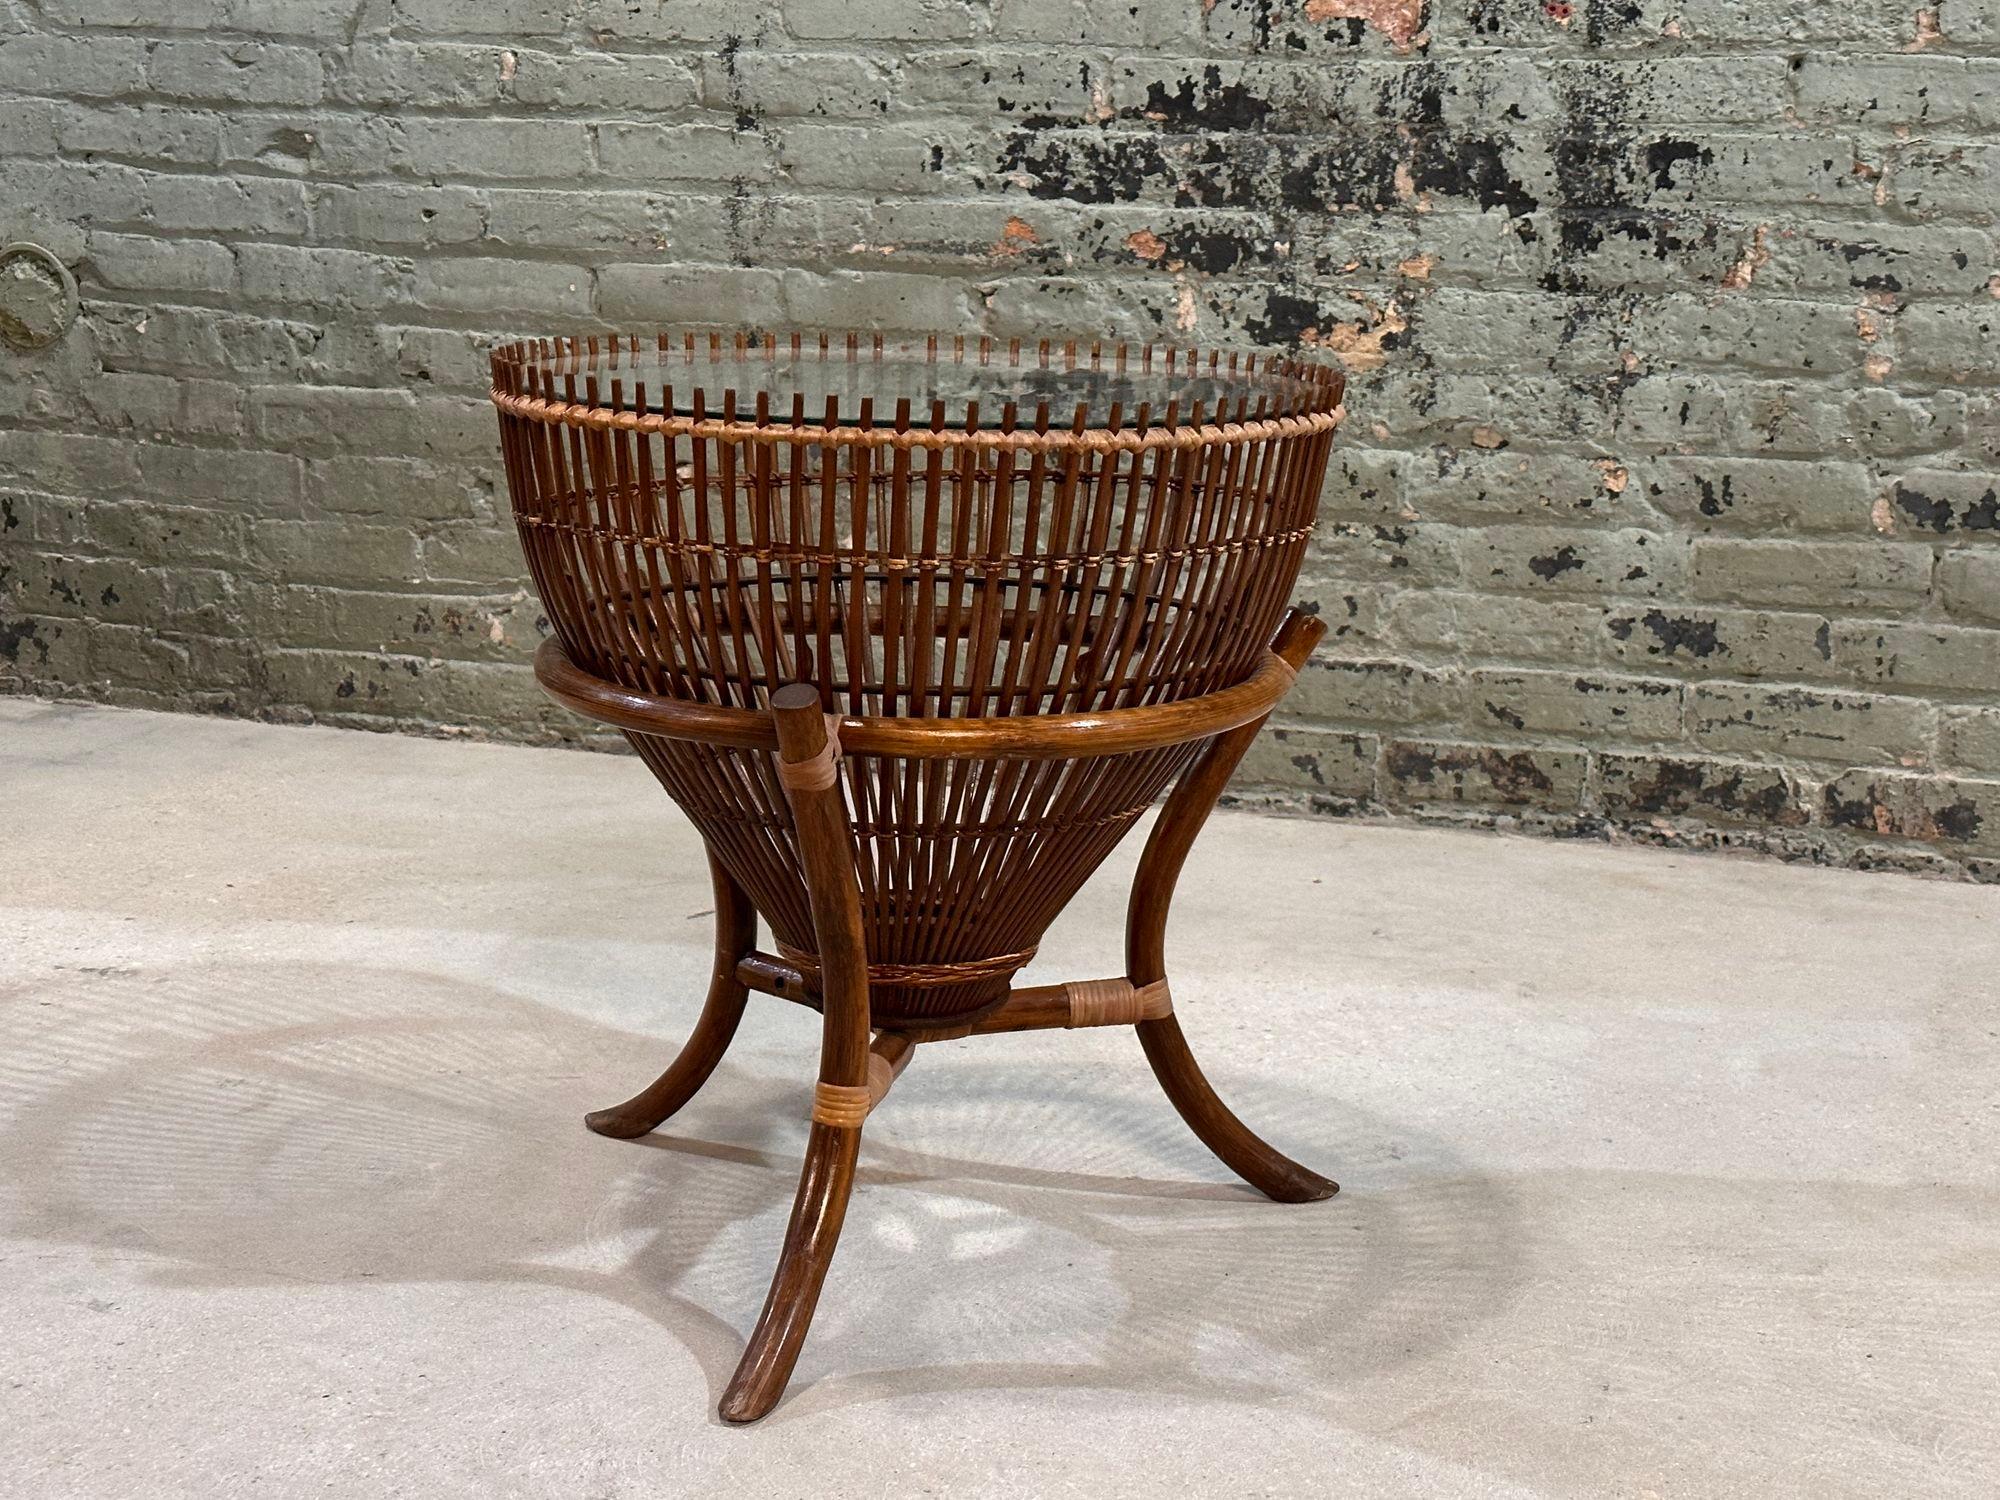 Rattan Fishing Basket Side/End Table Style of Franco Albini, 1960's. Original beautiful round side/end table with glass top.